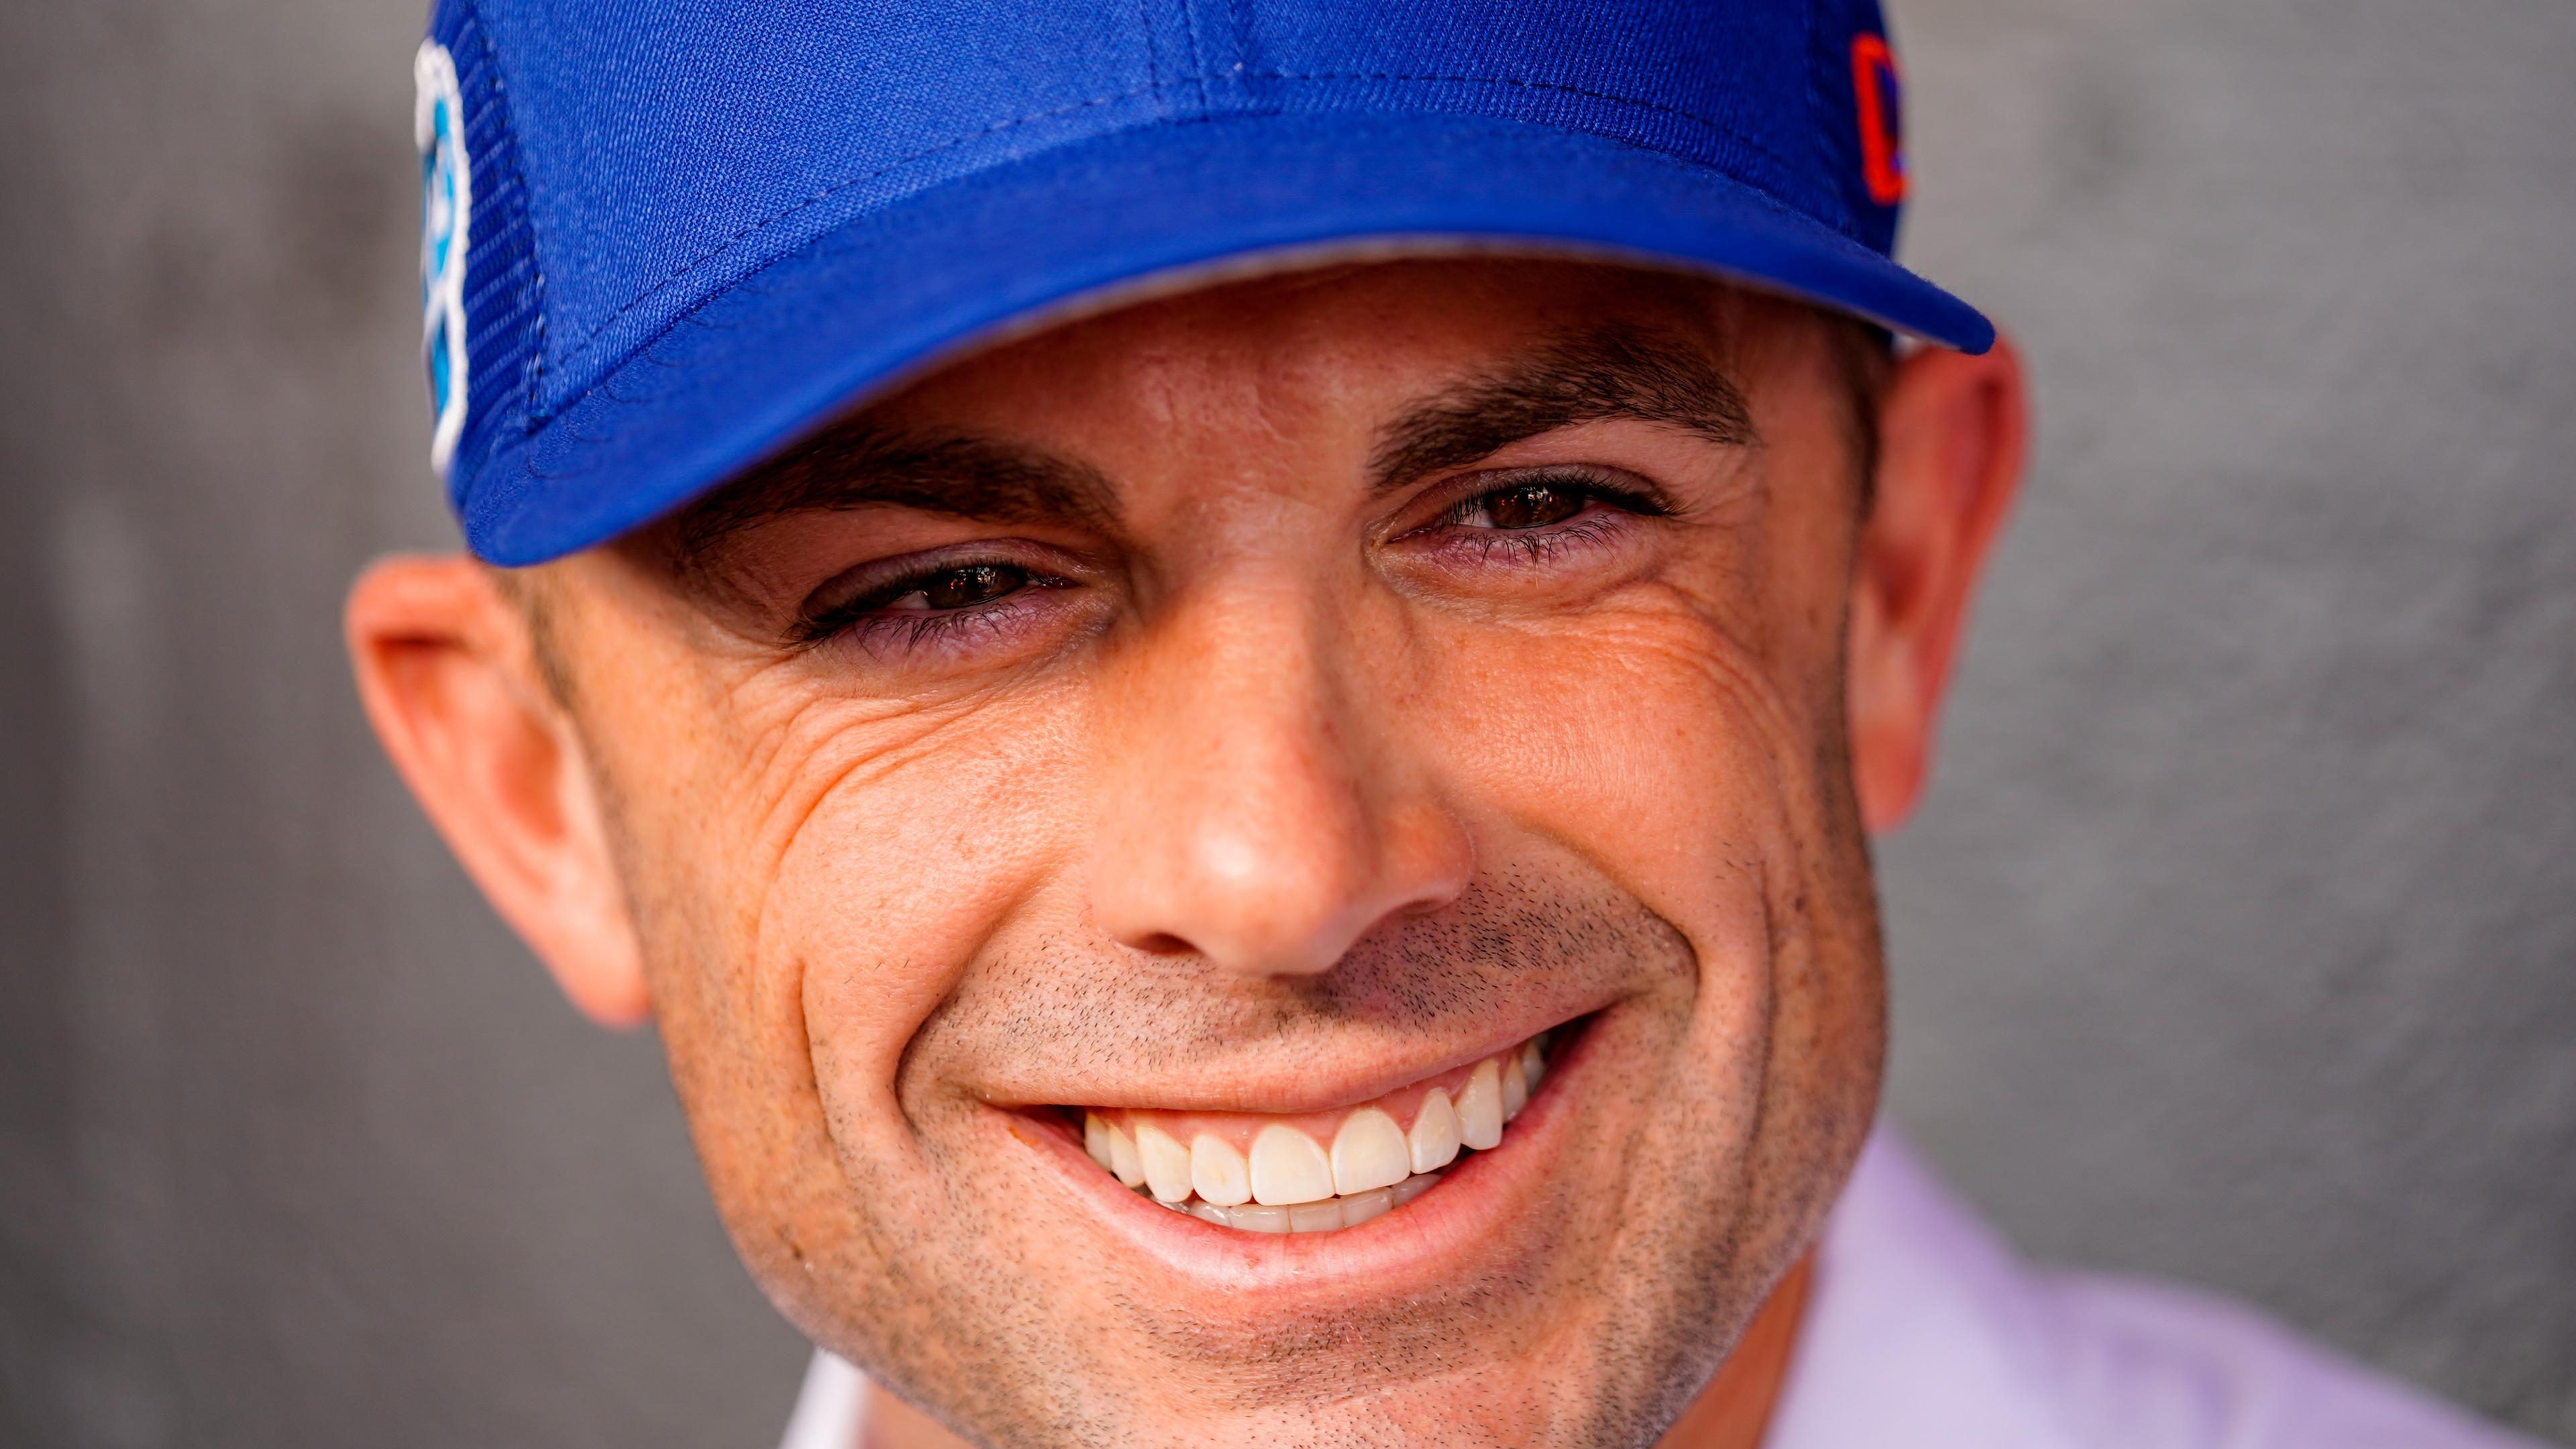 Former New York Mets third baseman David Wright talks to press prior to a game between the New York Mets and the Atlanta Braves at Clover Park